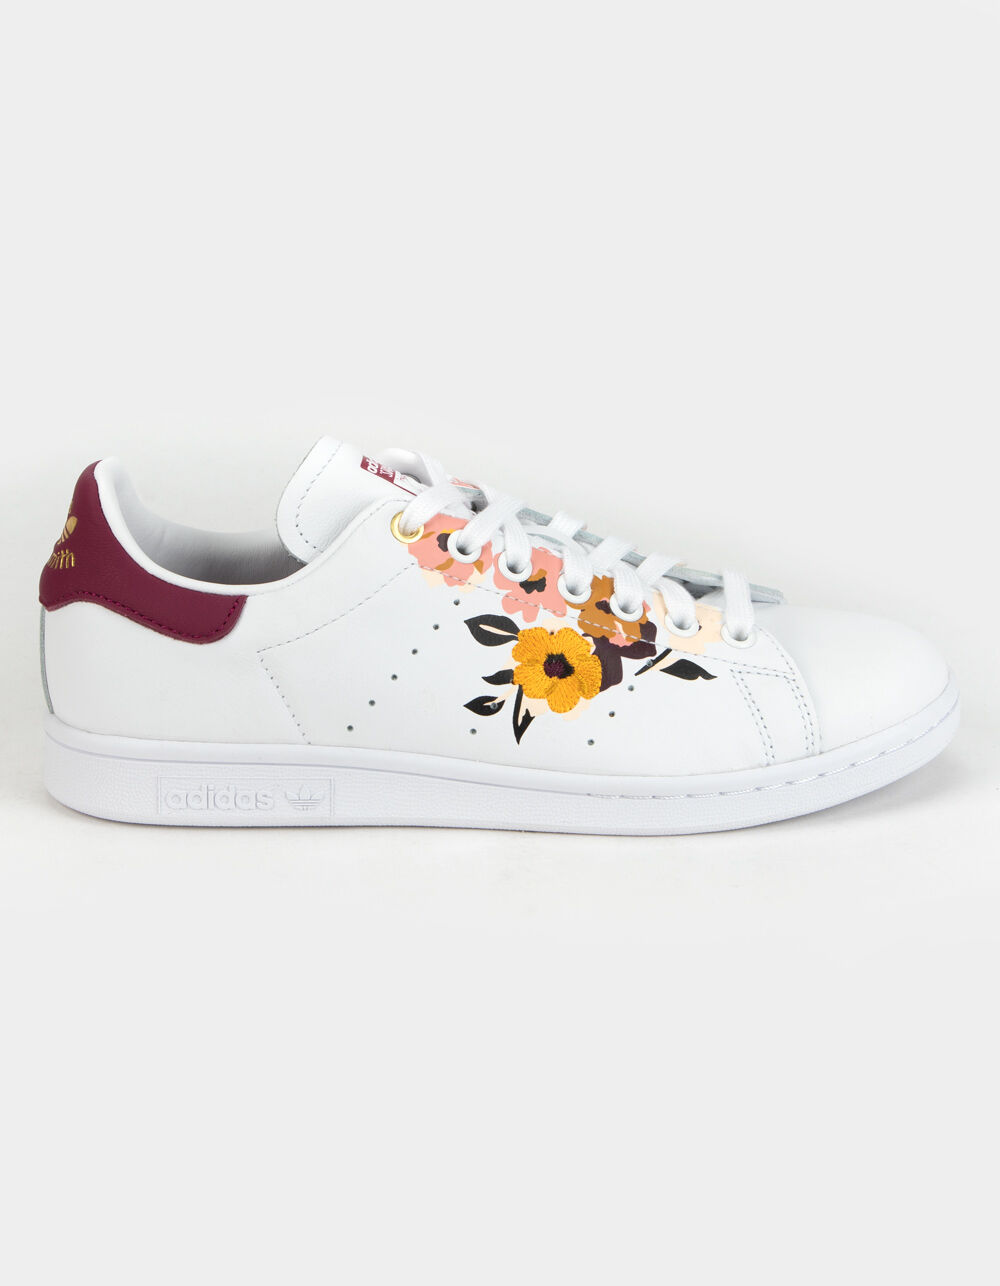 adidas Originals Stan Smith Floral Canvas Trainers in White